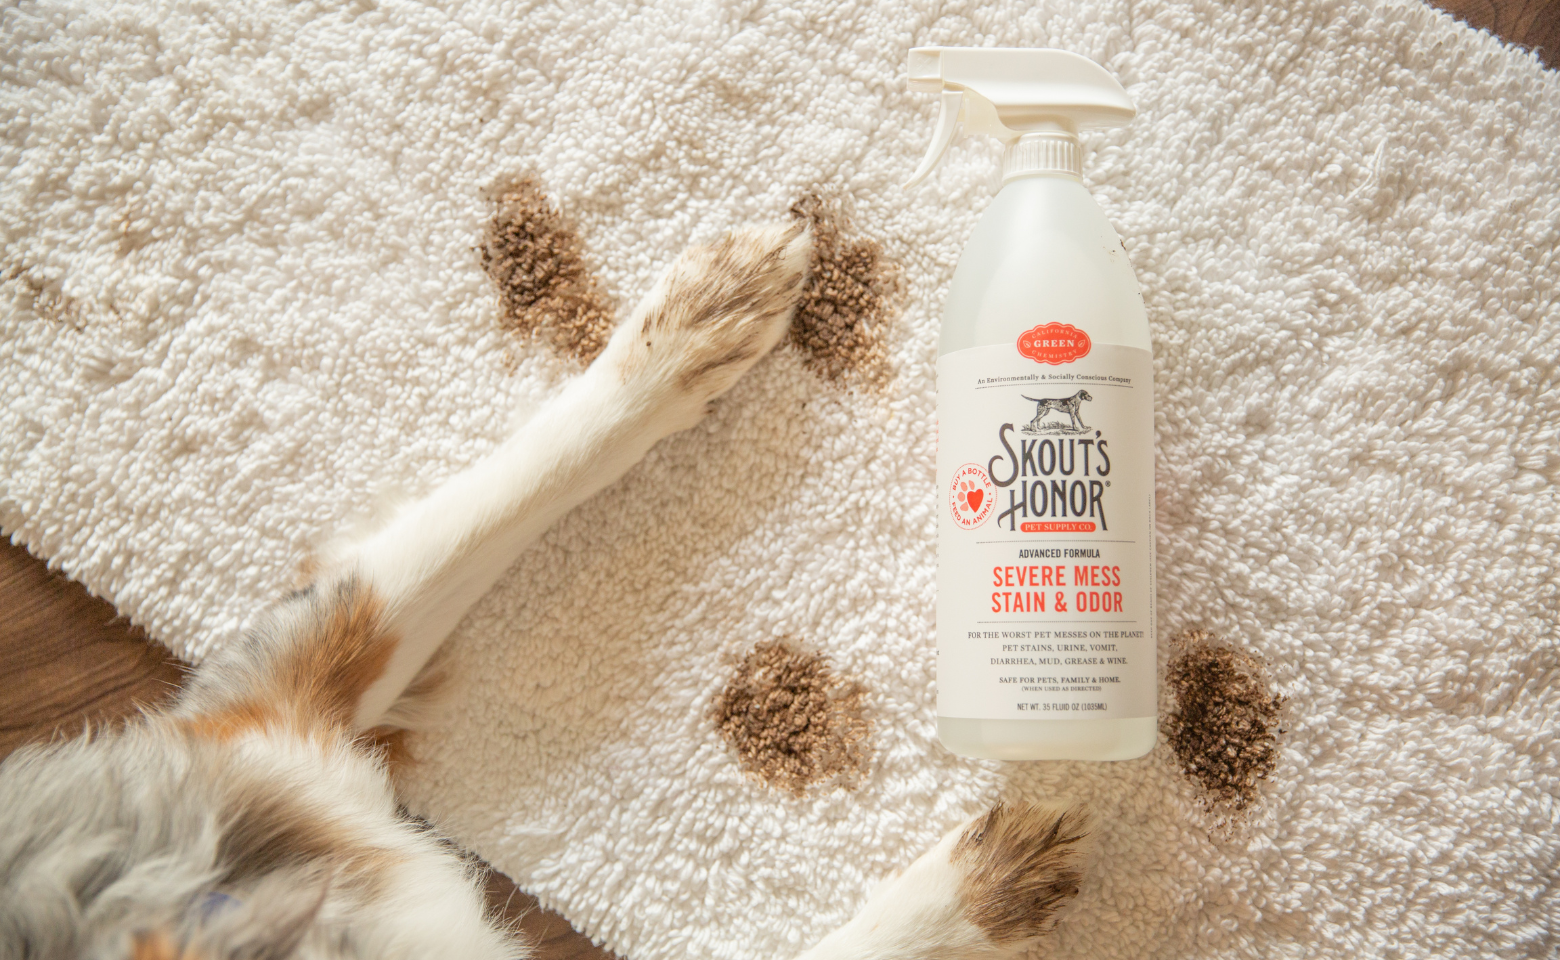 Muddy dog paws on white carpet with Skout's Honor Severe Mess Stain & Odor Remover